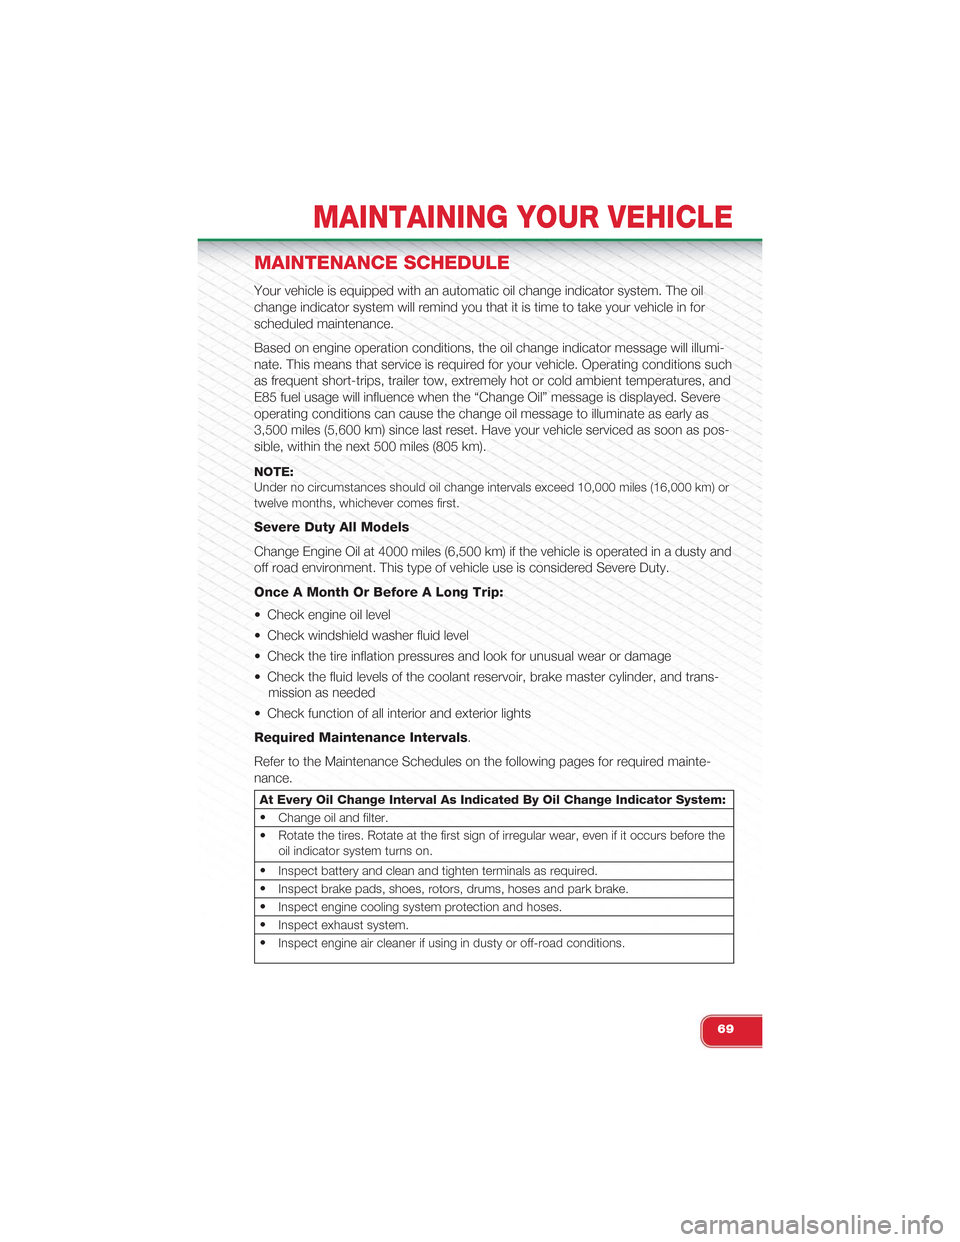 FIAT 500 ABARTH 2014 2.G User Guide MAINTENANCE SCHEDULE
Your vehicle is equipped with an automatic oil change indicator system. The oil
change indicator system will remind you that it is time to take your vehicle in for
scheduled maint